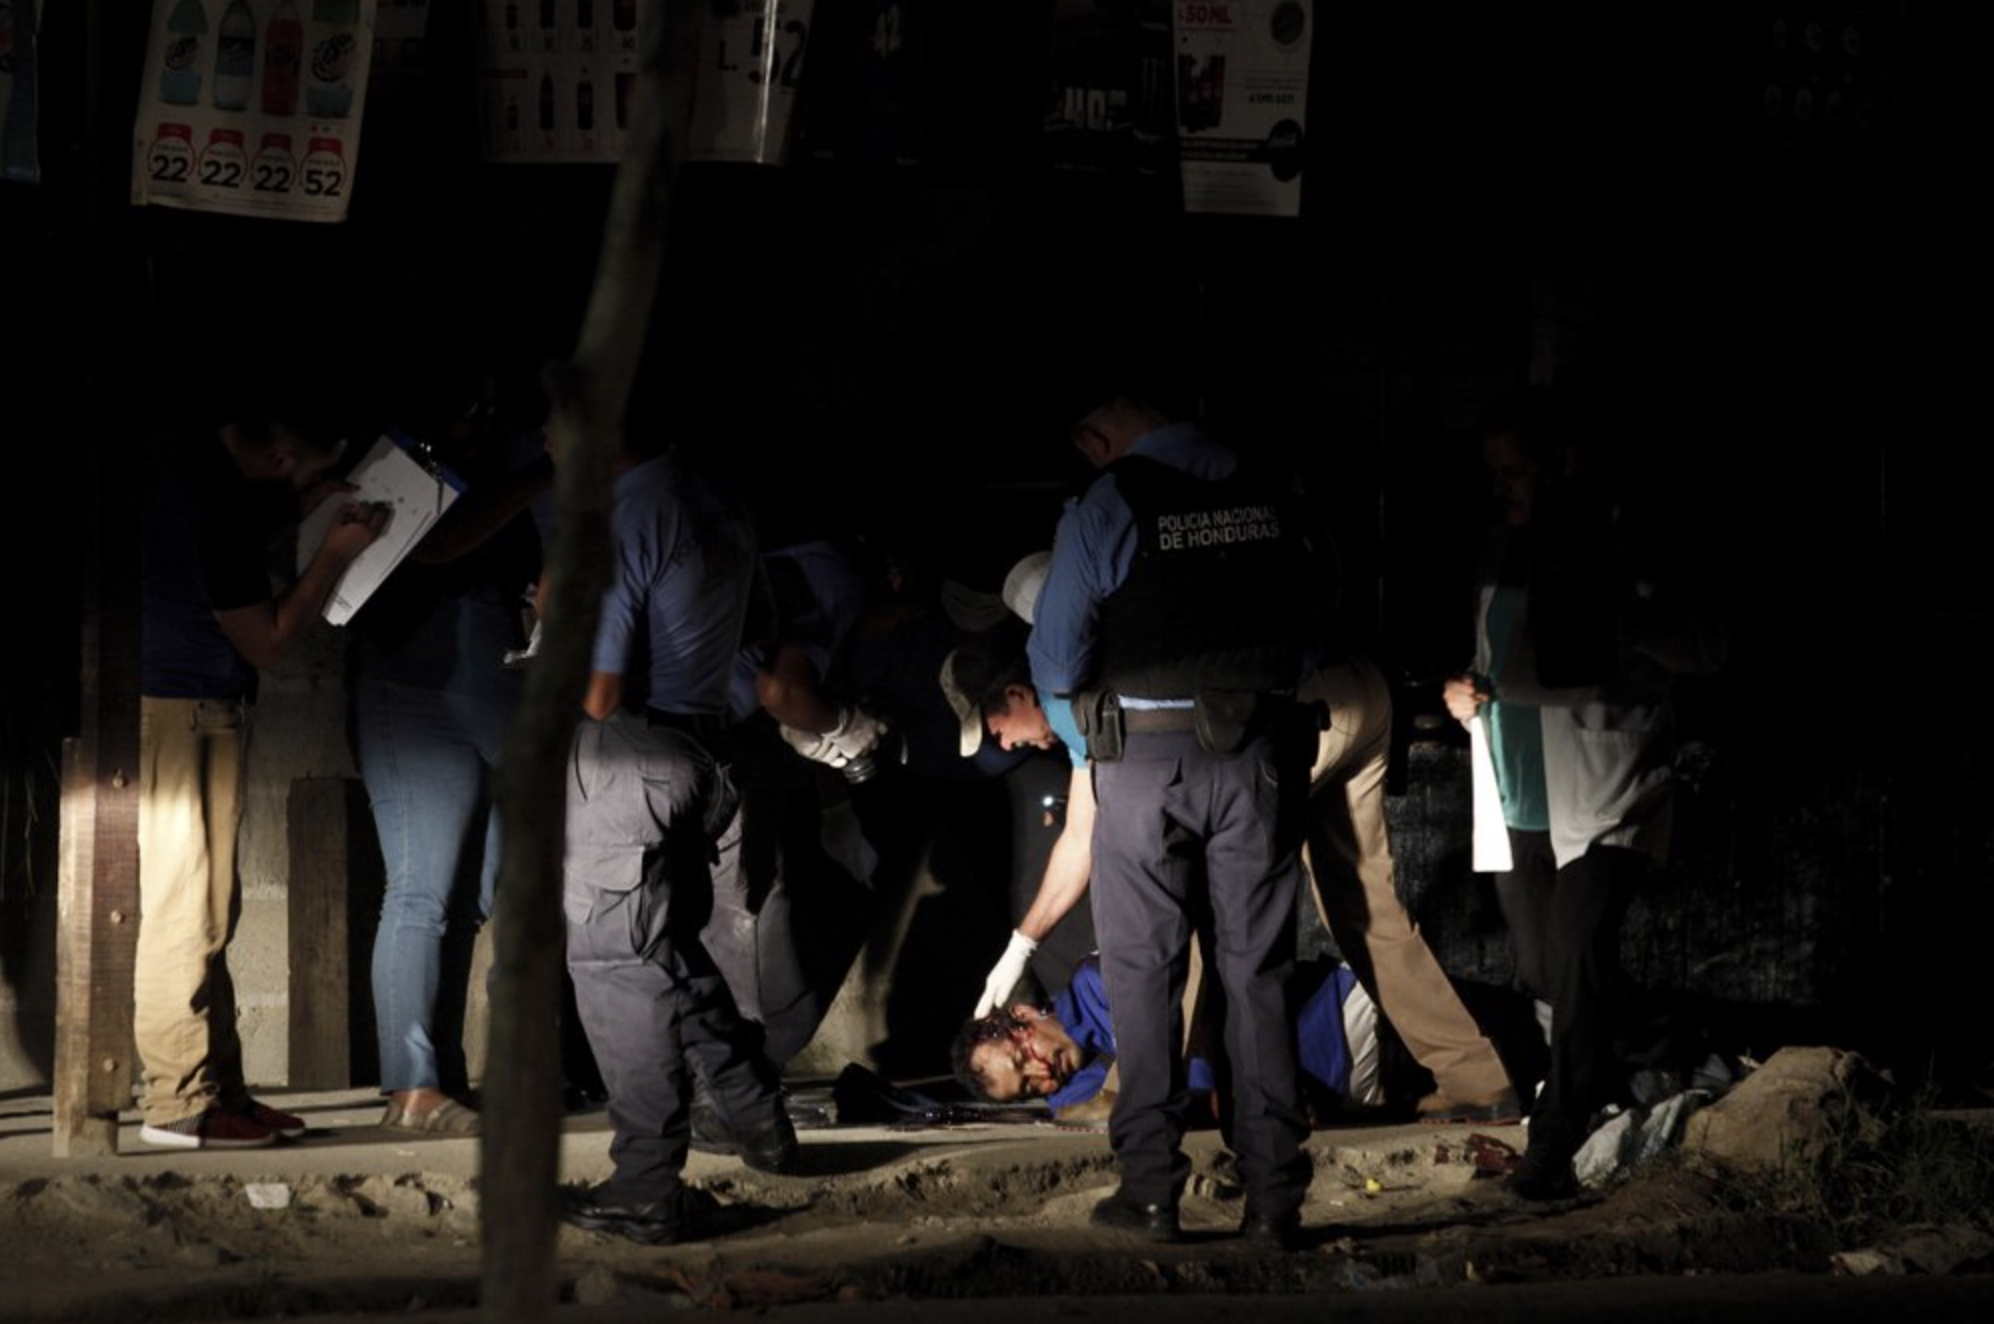 The body of a man lies in the middle of a street as police and forensic workers inspect the crime scene in the Rivera Hernandez neighborhood of San Pedro Sula, Honduras, on Nov. 30, 2019. Image by Moises Castillo/ AP Photo. Honduras, 2019.